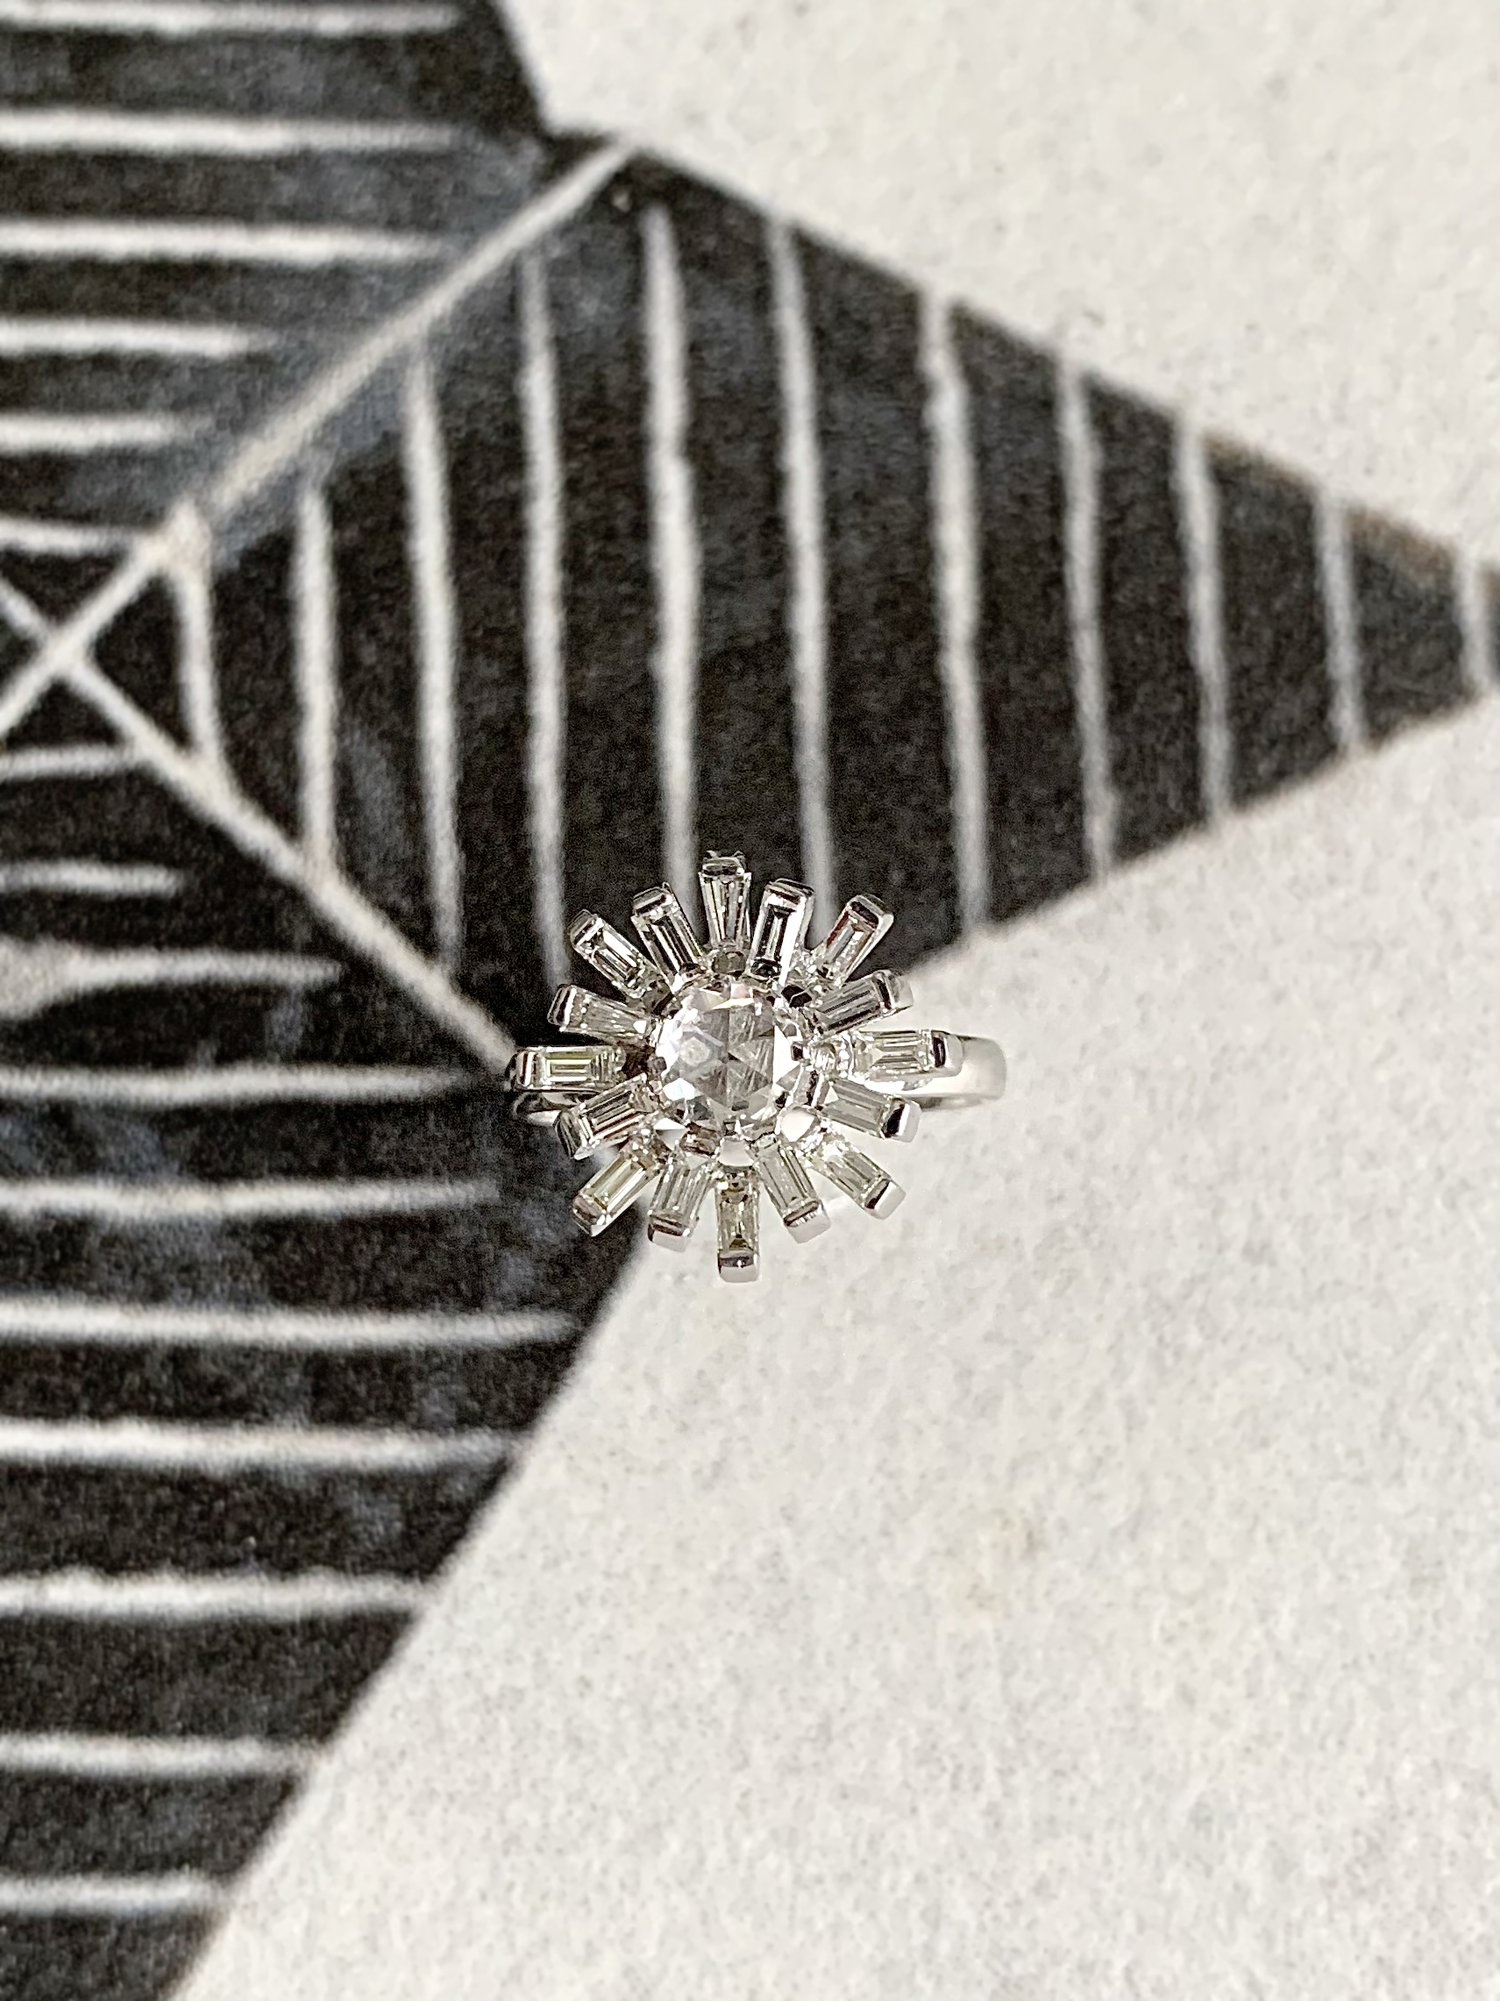 Capella Rose Cut Diamond Center with Baguette Star Flair 18K White Gold Engagement Ring — Albuquerque | Jewelry | Engagement Rings | Albuquerque | New